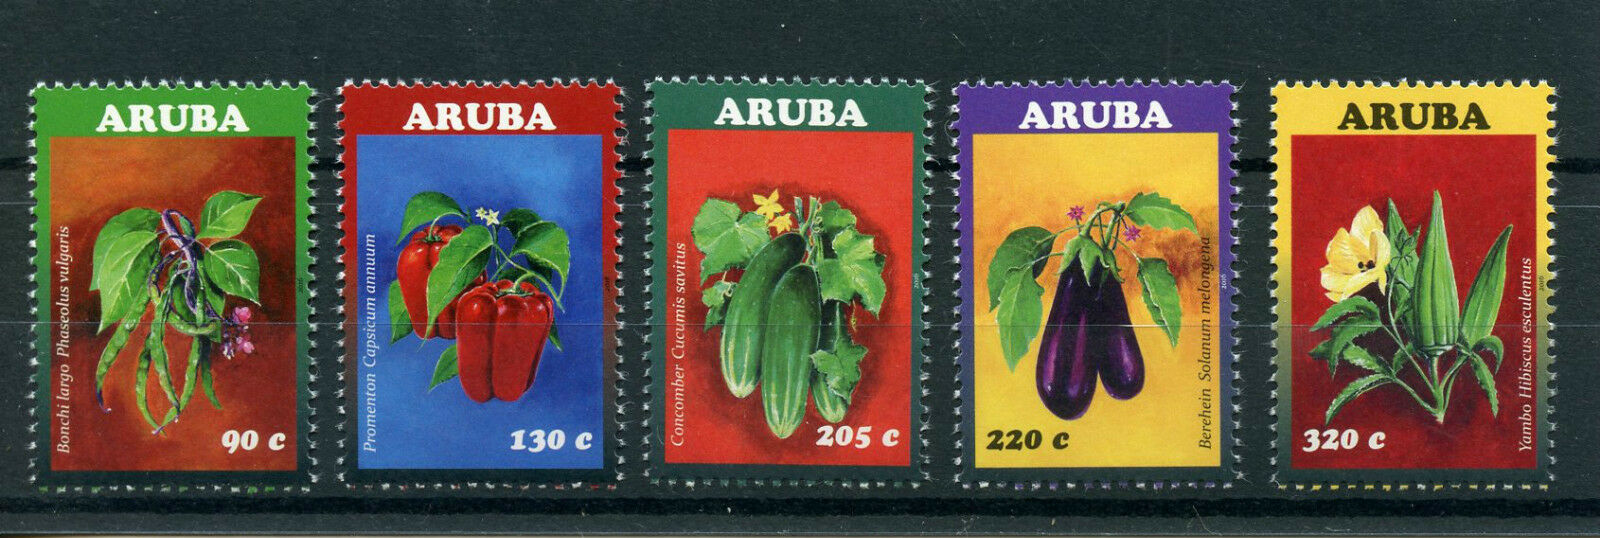 Aruba Plants Stamps 2016 MNH Vegetables Sweet Chili Peppers Cucumbers 5v Set